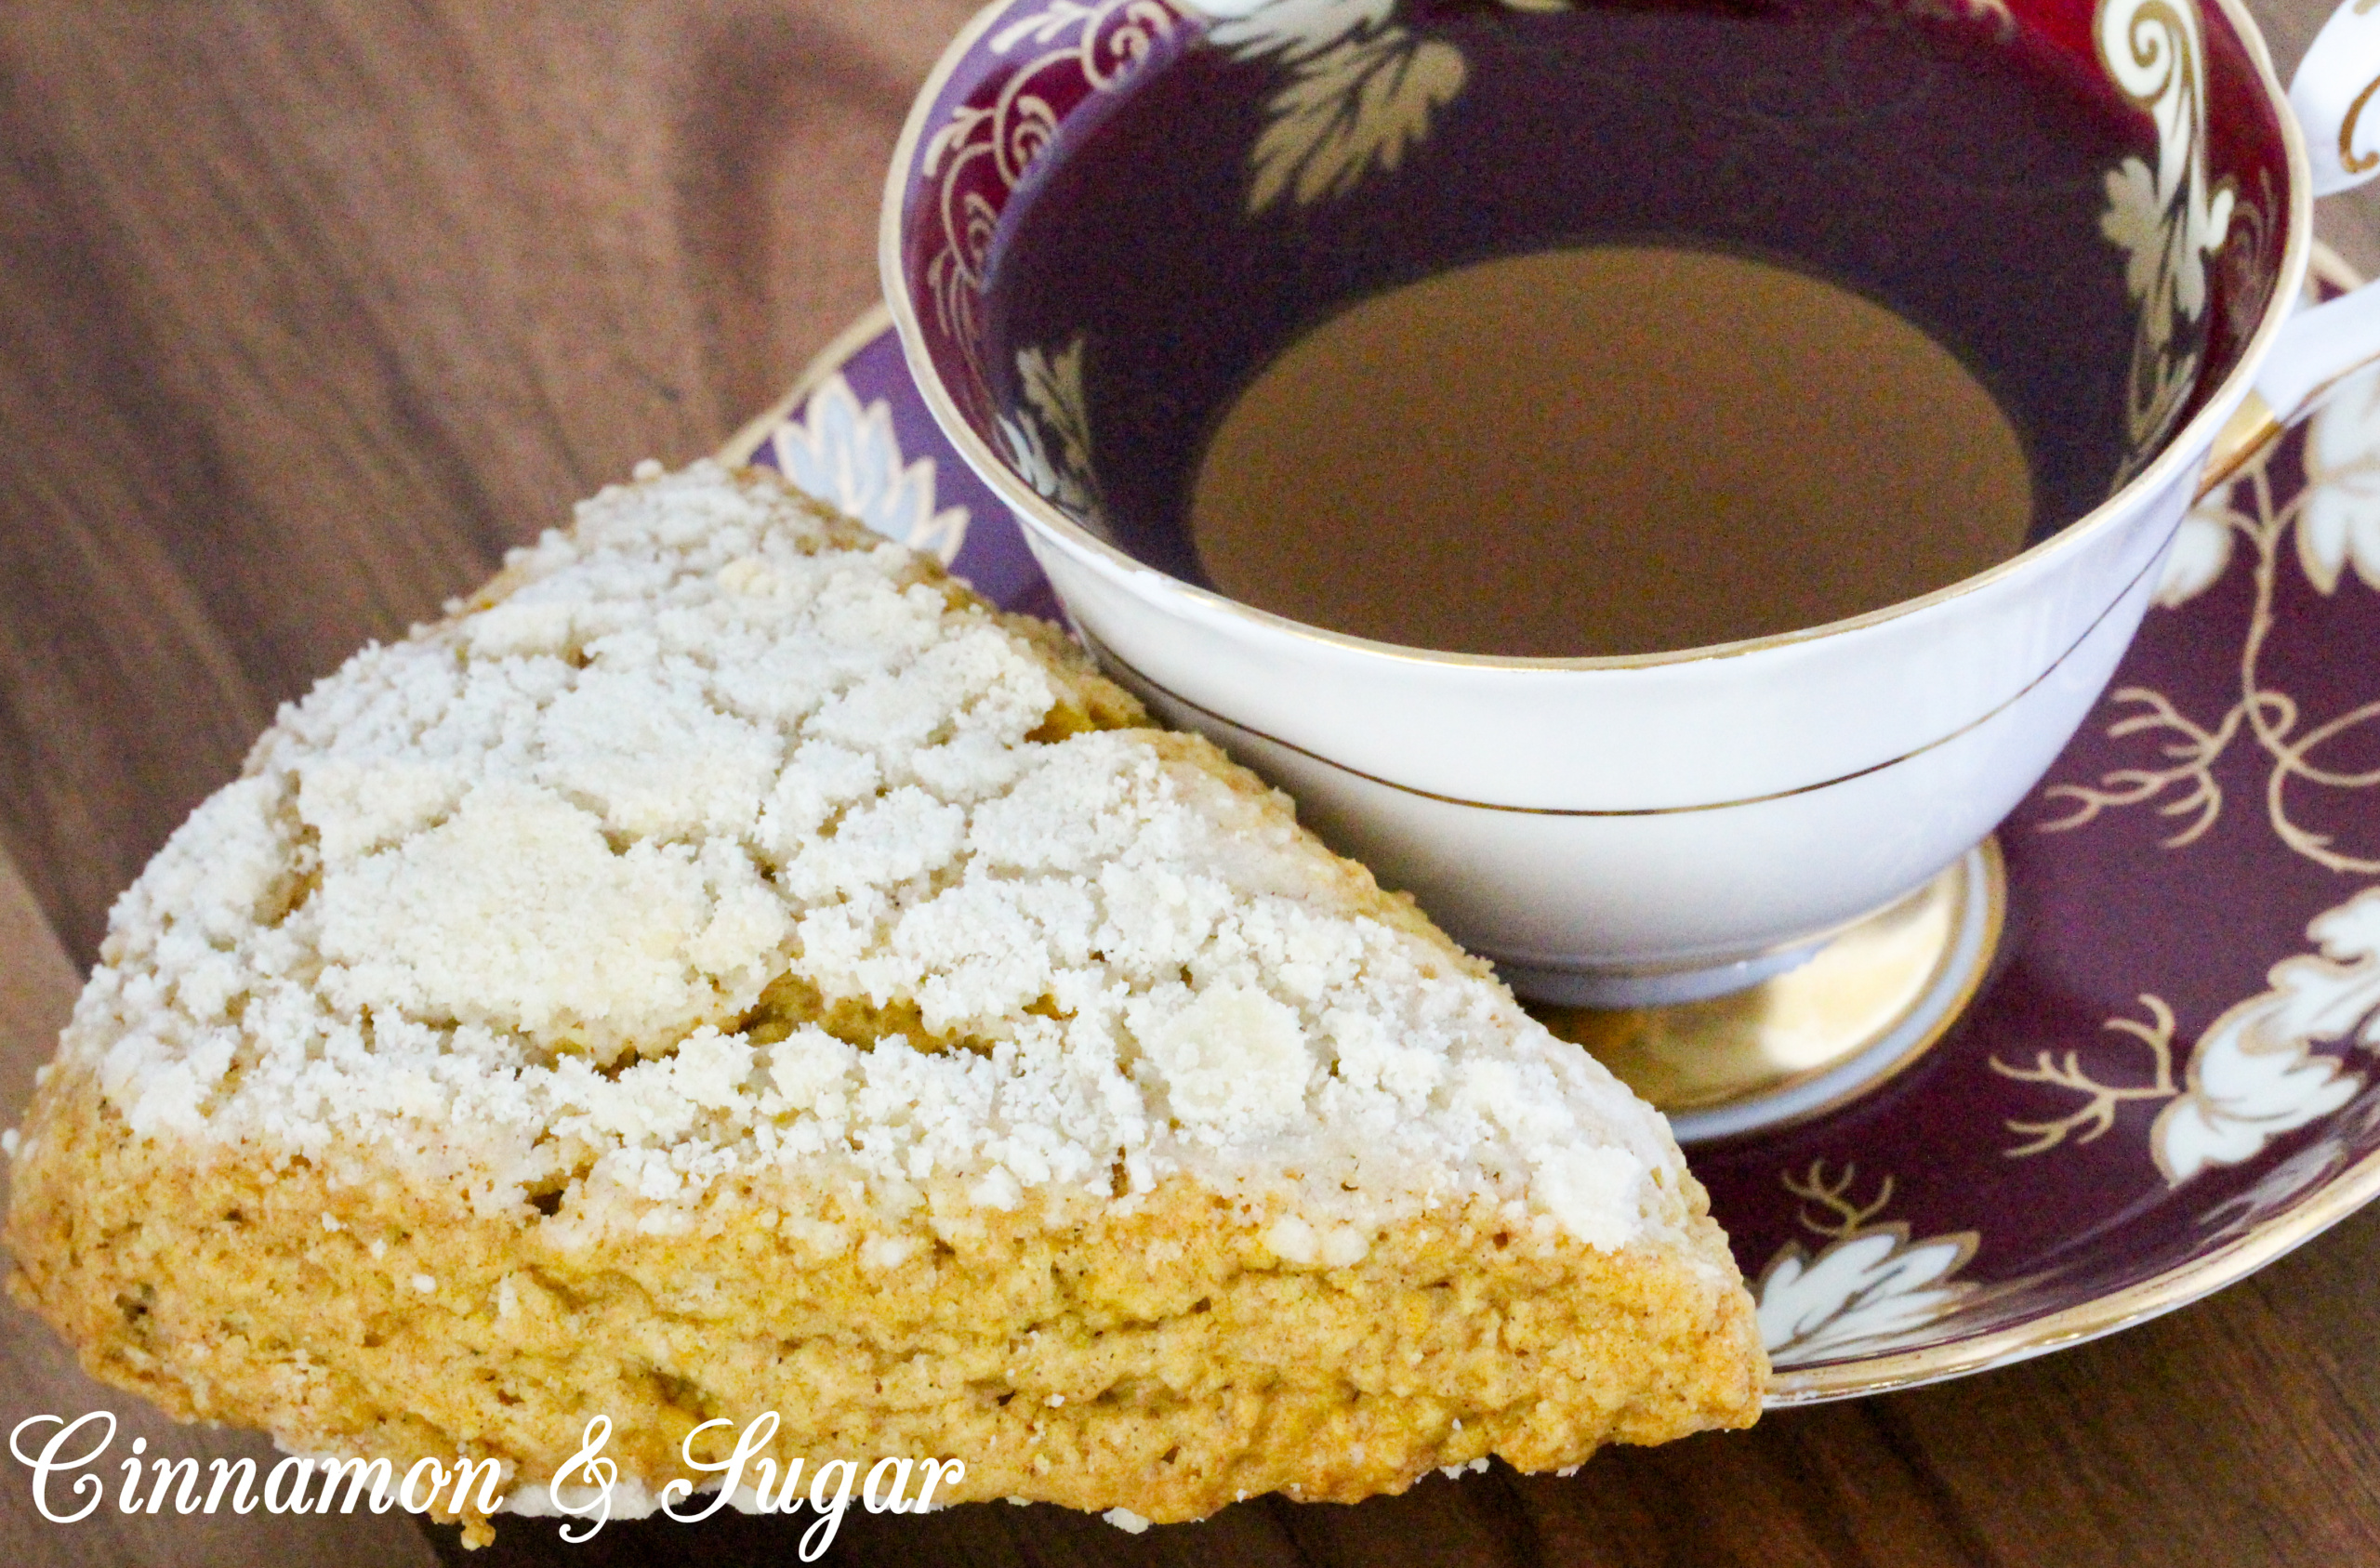 Sweet streusel complements the cinnamon in these Maple-Pumpkin Scones without being overly crumbly. Mild pumpkin brings color and a moist texture to these tea time treats. Recipe shared with permission granted by Kate Carlisle, author of THE GRIM READER. 